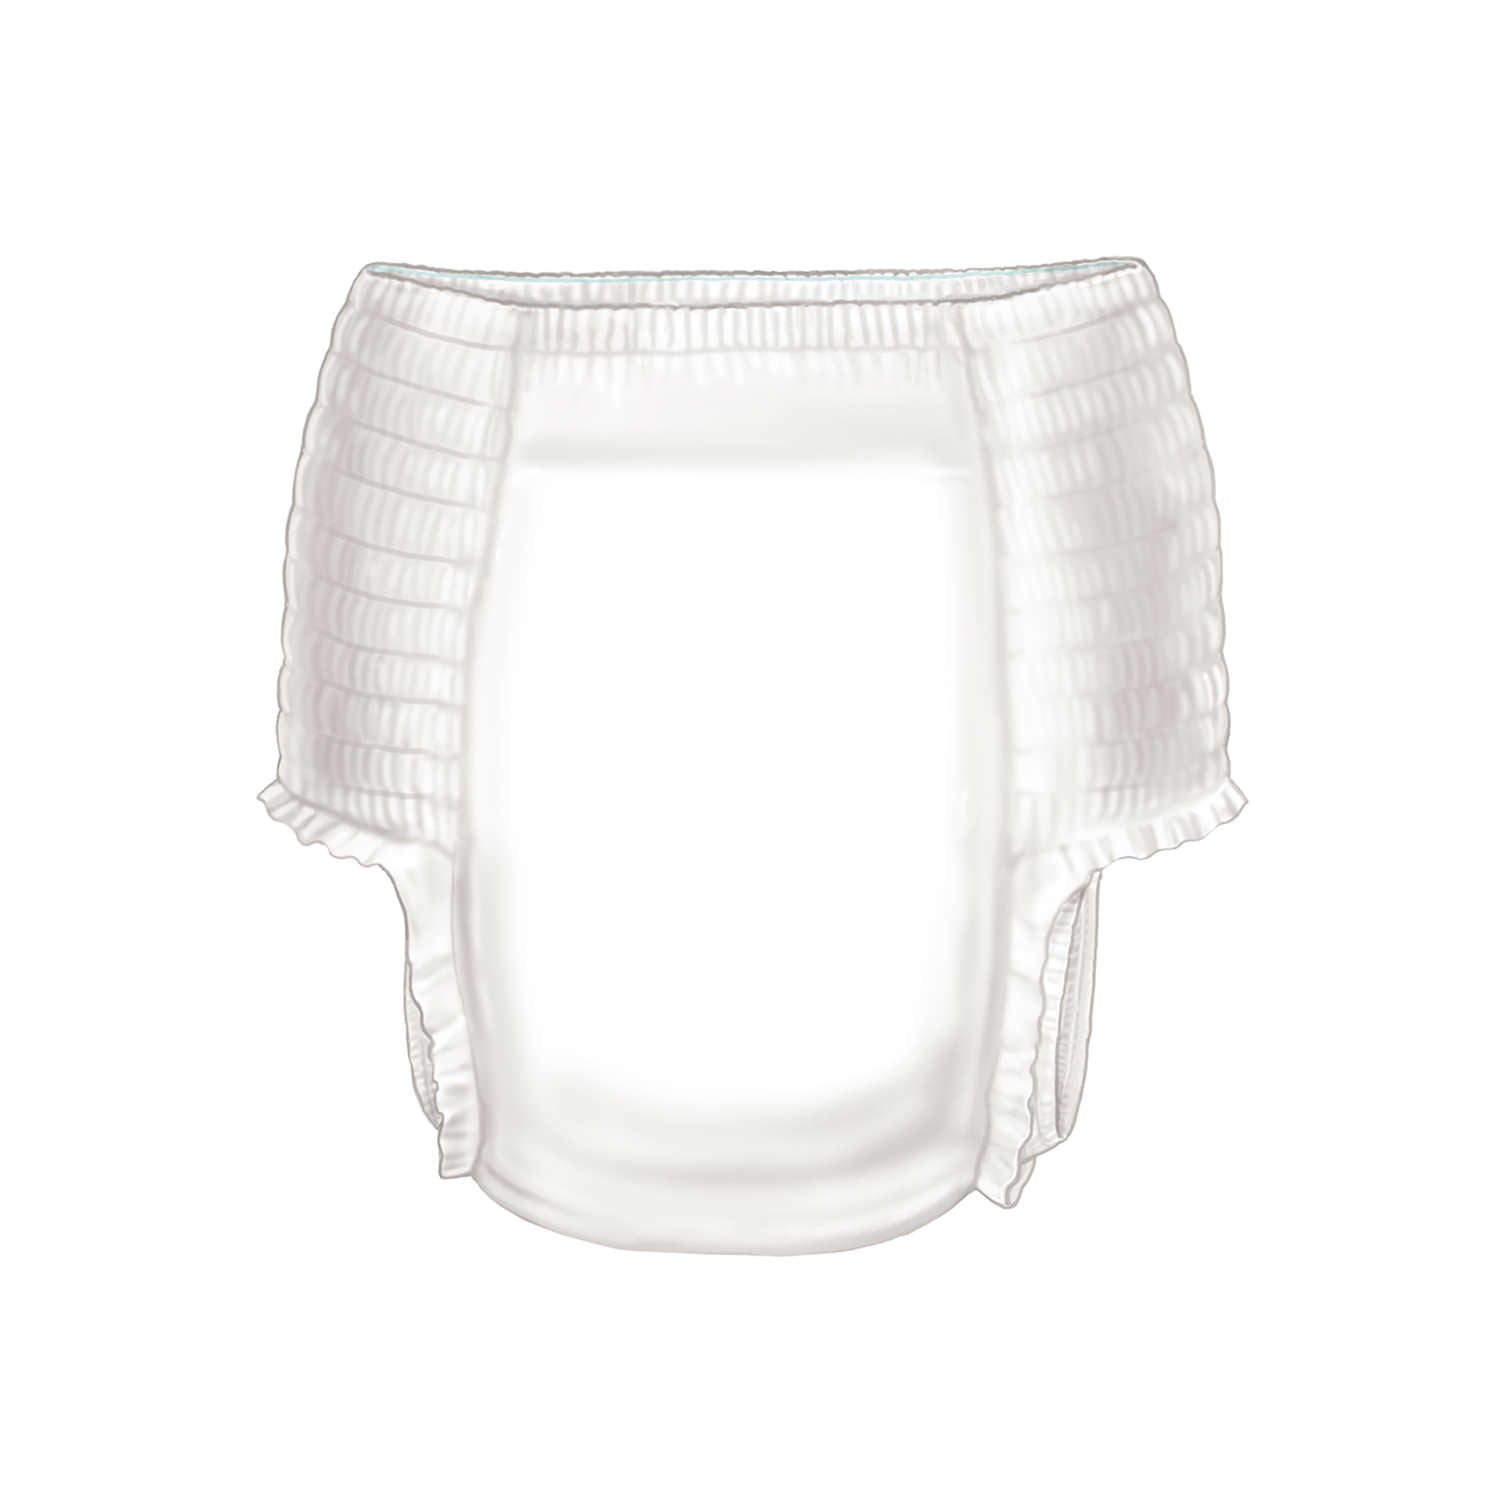 Older Kids, Youth protective disposable underwear - incontinence protection